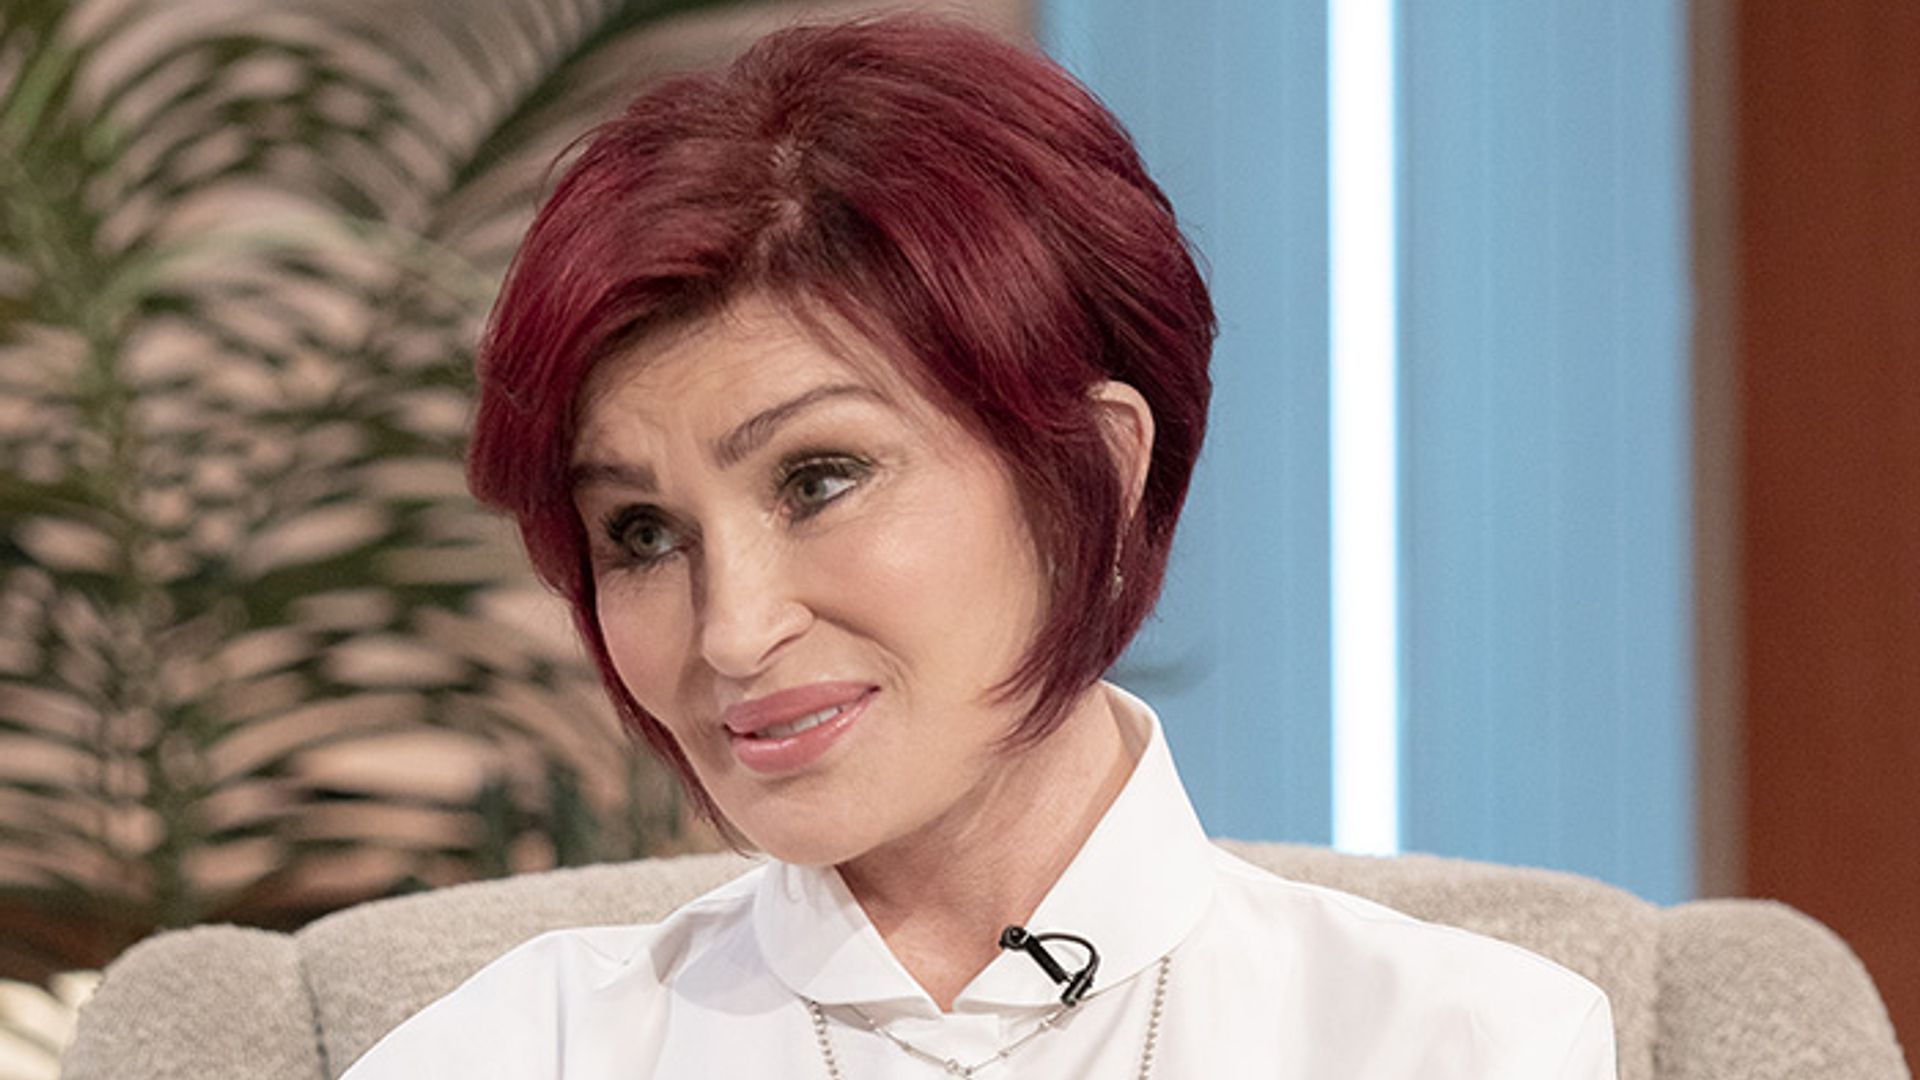 Sharon Osbourne, 70, admits regret as she showcases dramatic weight loss thumbnail